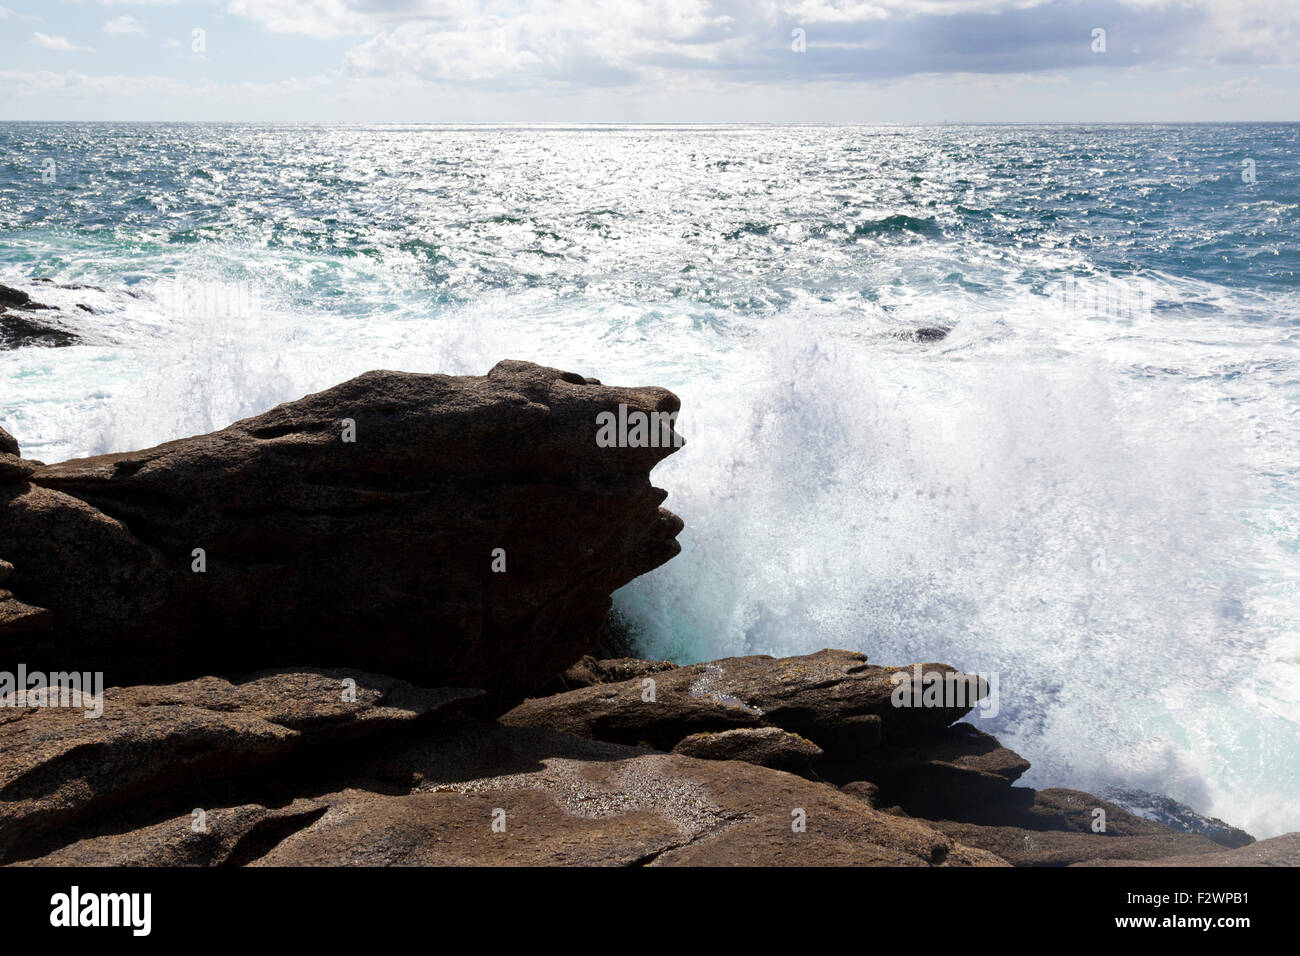 The western coast of the Quiberon Peninsula - the Cote Sauvage - at Beg er Goalennec, Brittany, France Stock Photo